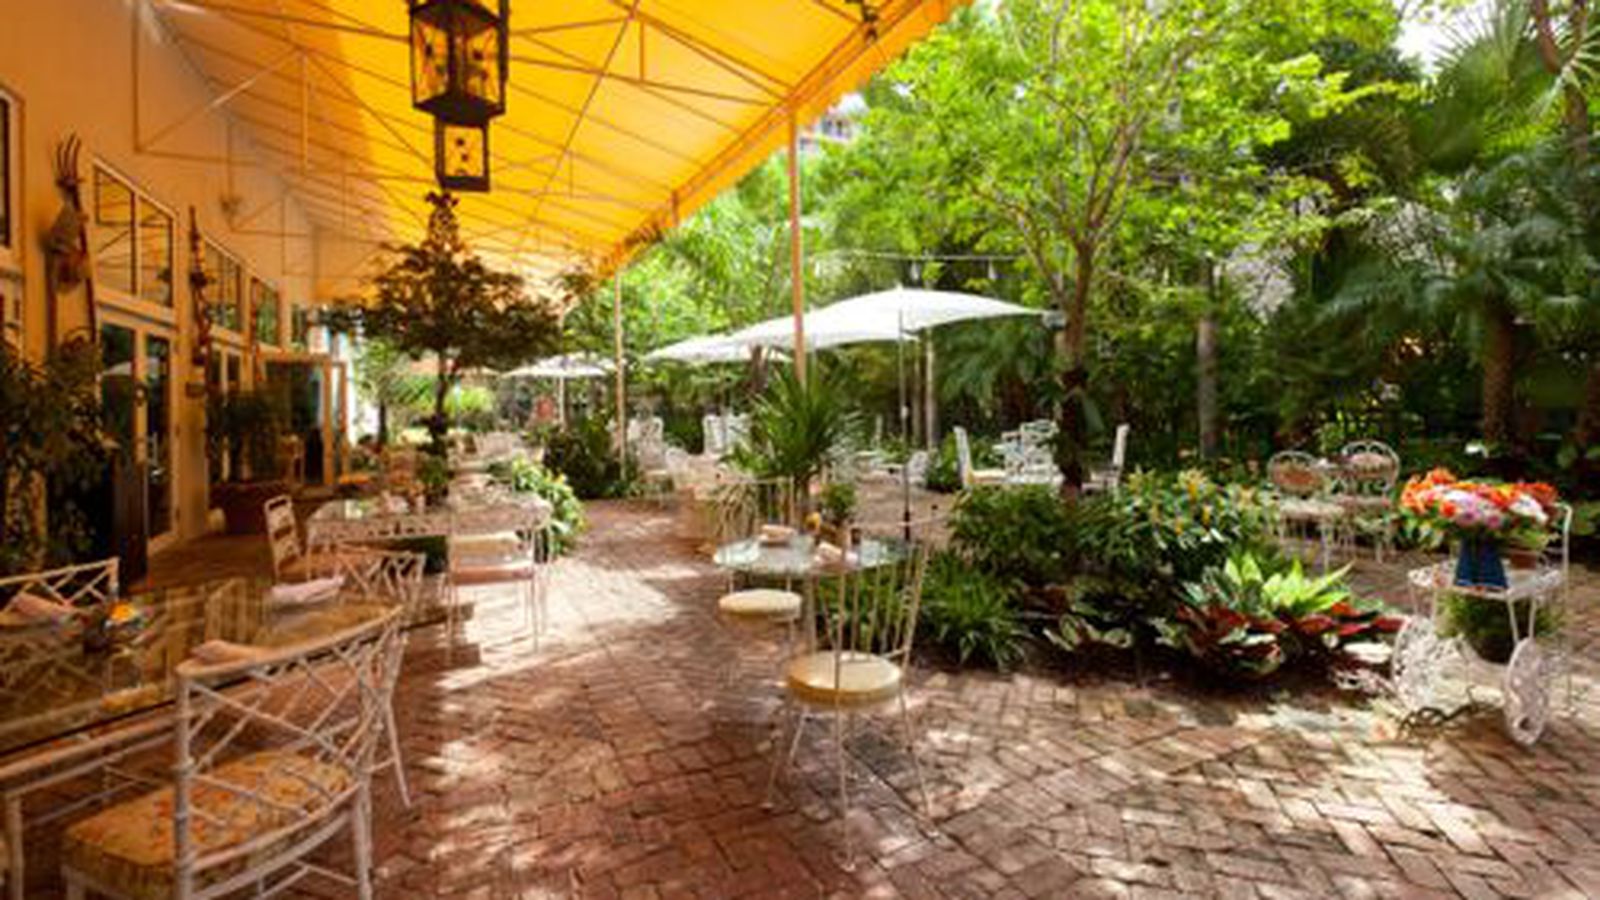 COCONUT GROVE - To welcome the fall, Peacock Garden Café is launching Live ...